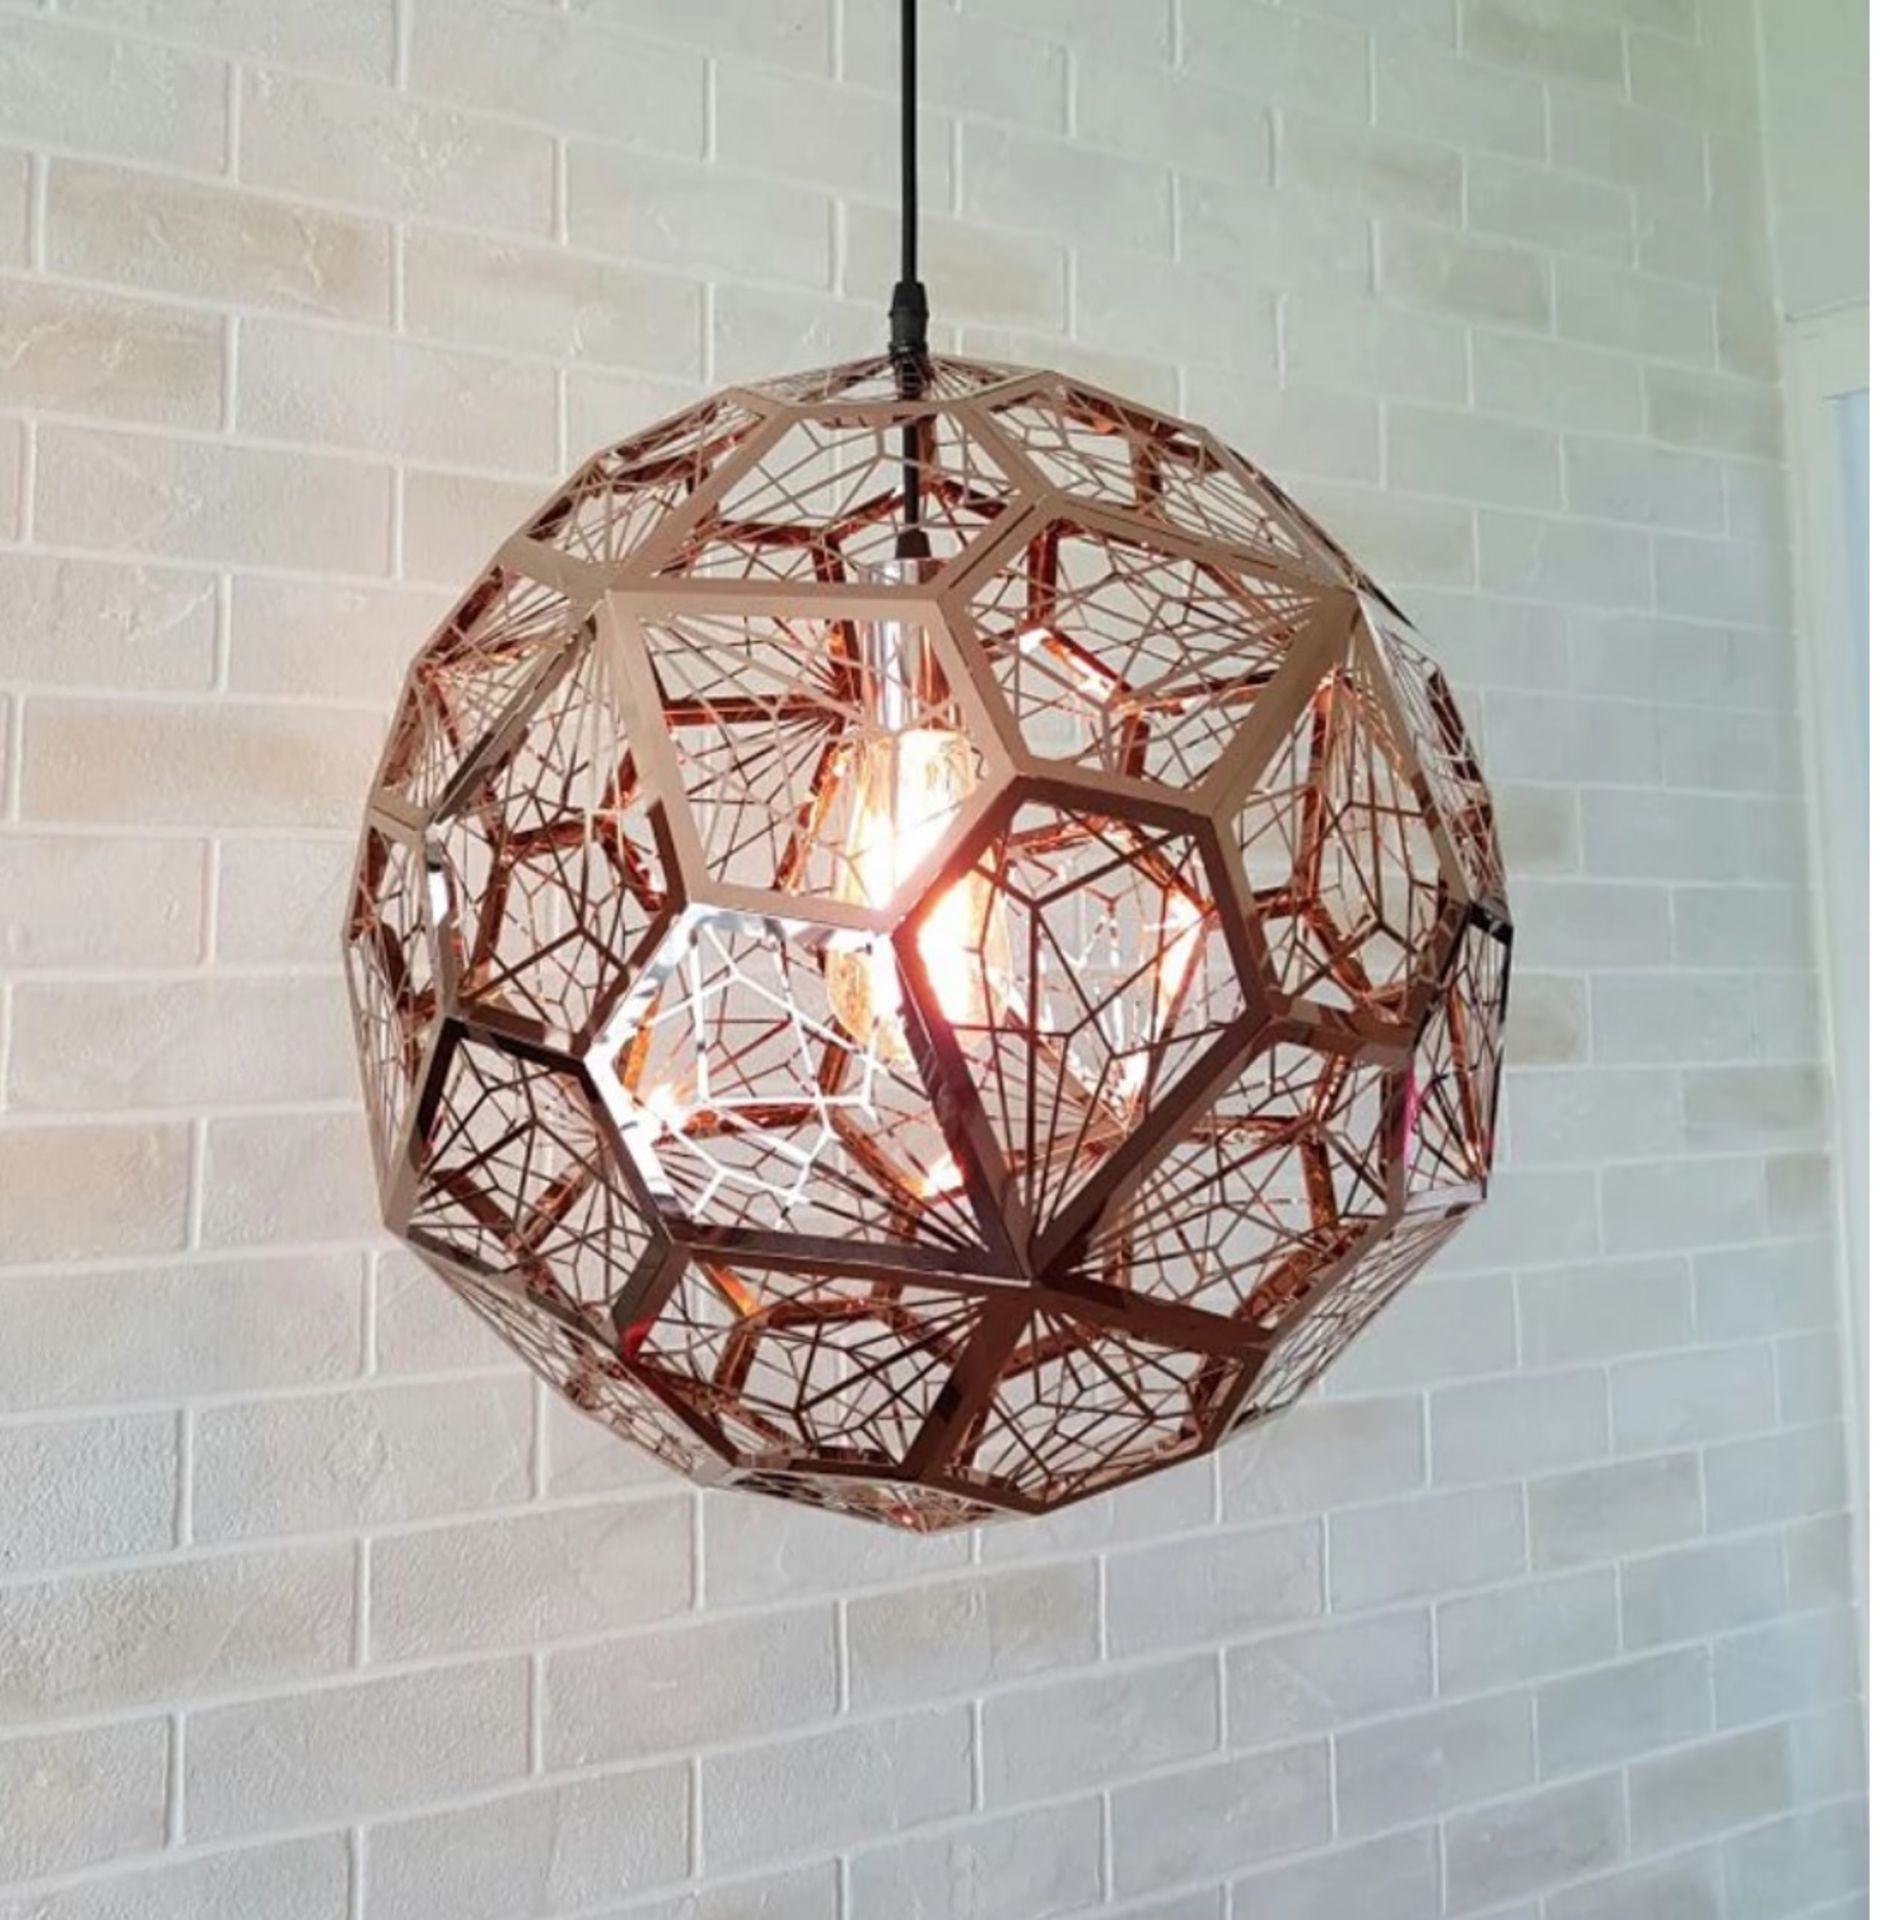 Rango Acid 40cm Copper Pendant Light first created with capacity and weight in mind. It is